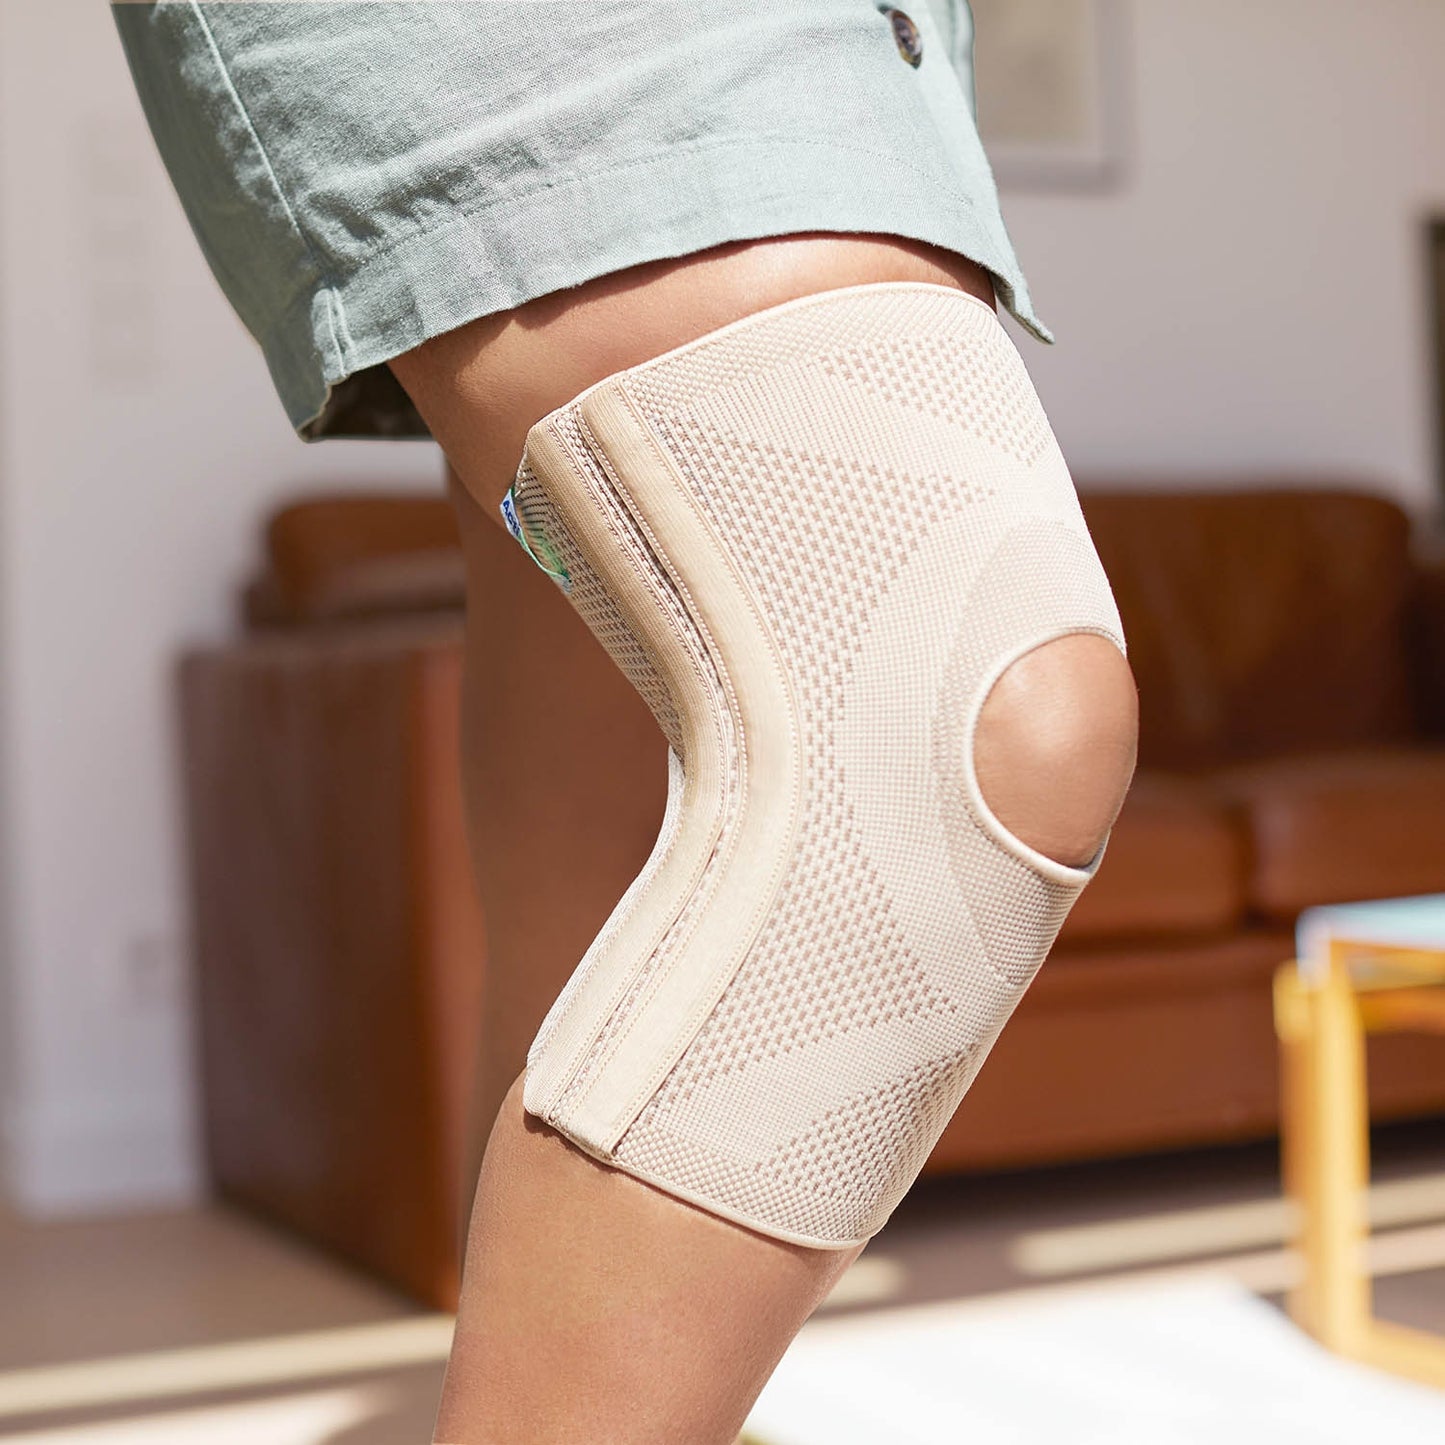 Actimove® Knee Support Open Patella - 4 Stays - EVERYDAY SUPPORTS